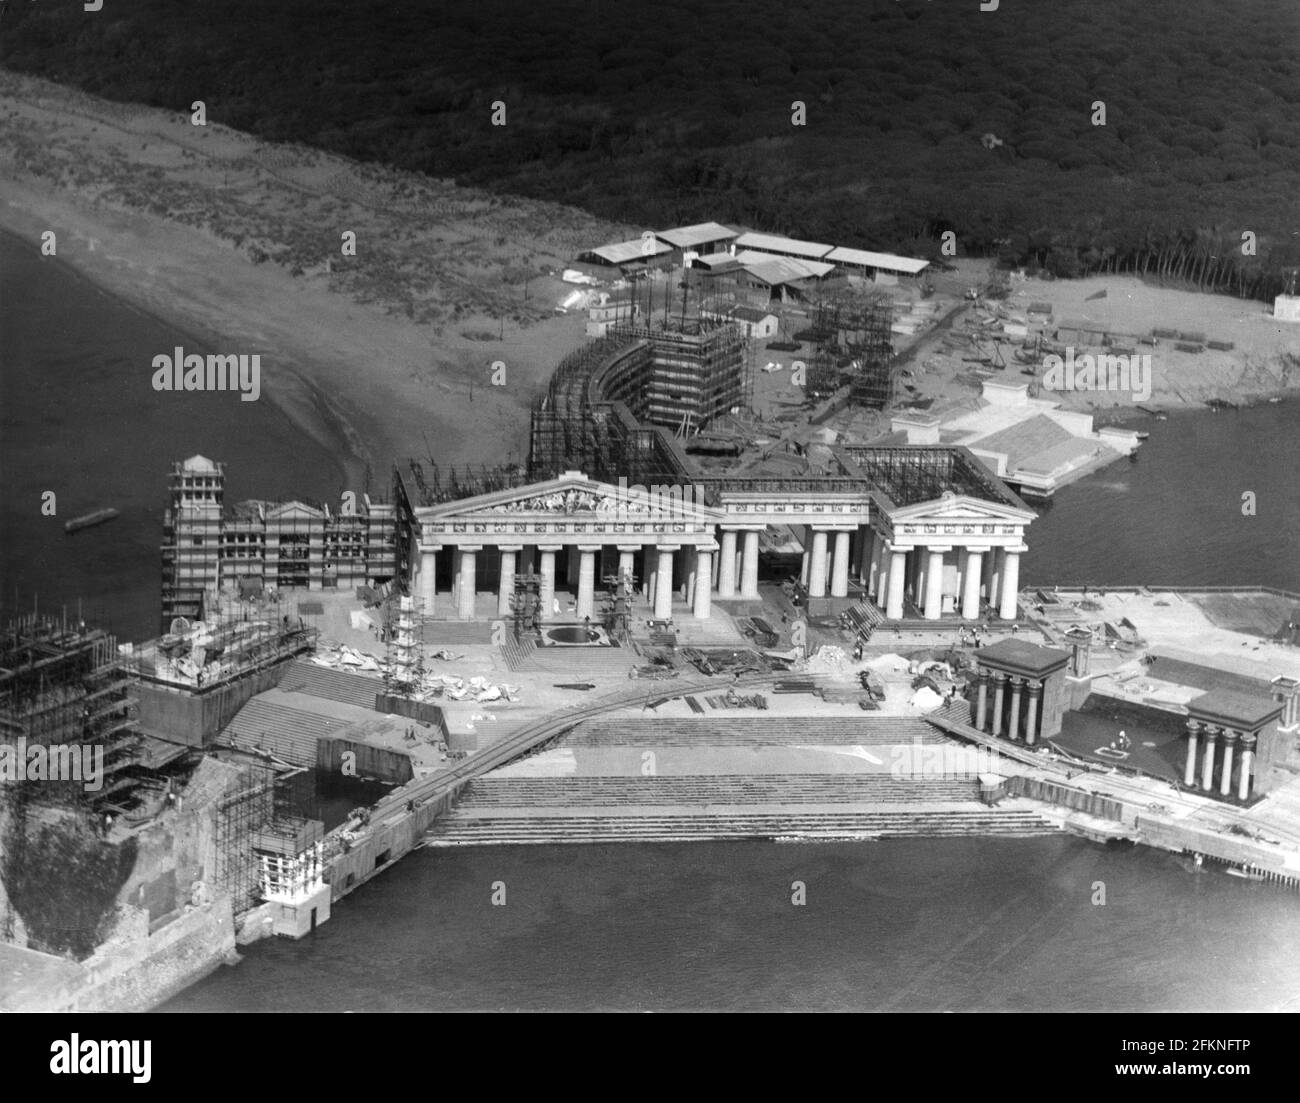 Aerial view of the Ancient Alexandria outside set under construction in Anzio, Italy for ELIZABETH TAYLOR RICHARD BURTON and REX HARRISON in CLEOPATRA 1963 director JOSEPH L. MANKIEWICZ screenplay Joseph L. Mankiewicz Ranald MacDougall and Sidney Buchman music Alex North producer Walter Wanger  Switzerland - UK - USA co-production MCL Films S.A. / Walwa Films S.A. / Twentieth Century Fox Stock Photo